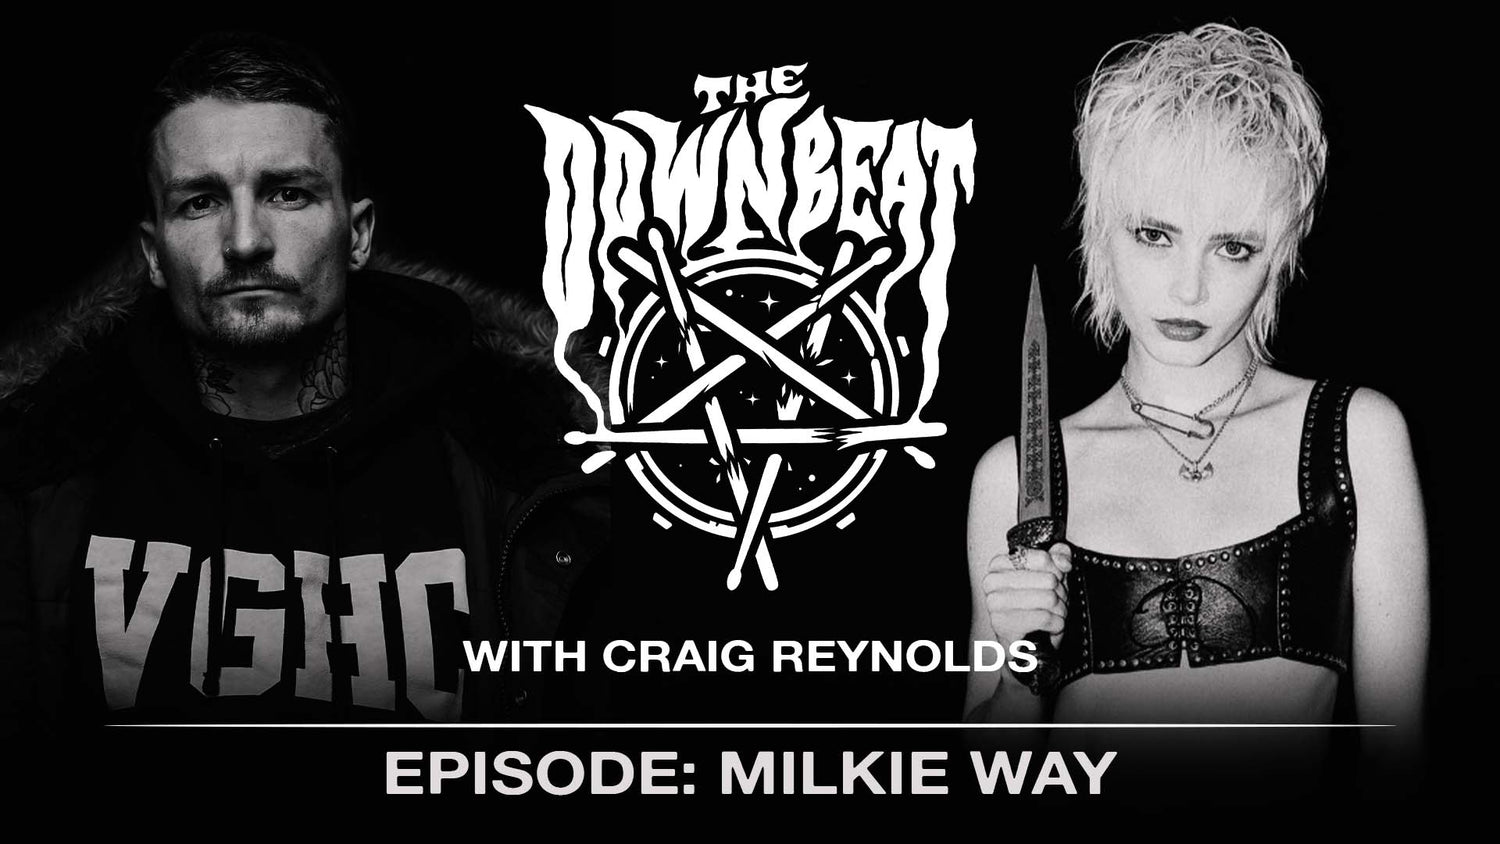 Wardrobe malfunctions, visual art, and a modern approach to punk - Milkie Way of Wargasm guests on The Downbeat podcast